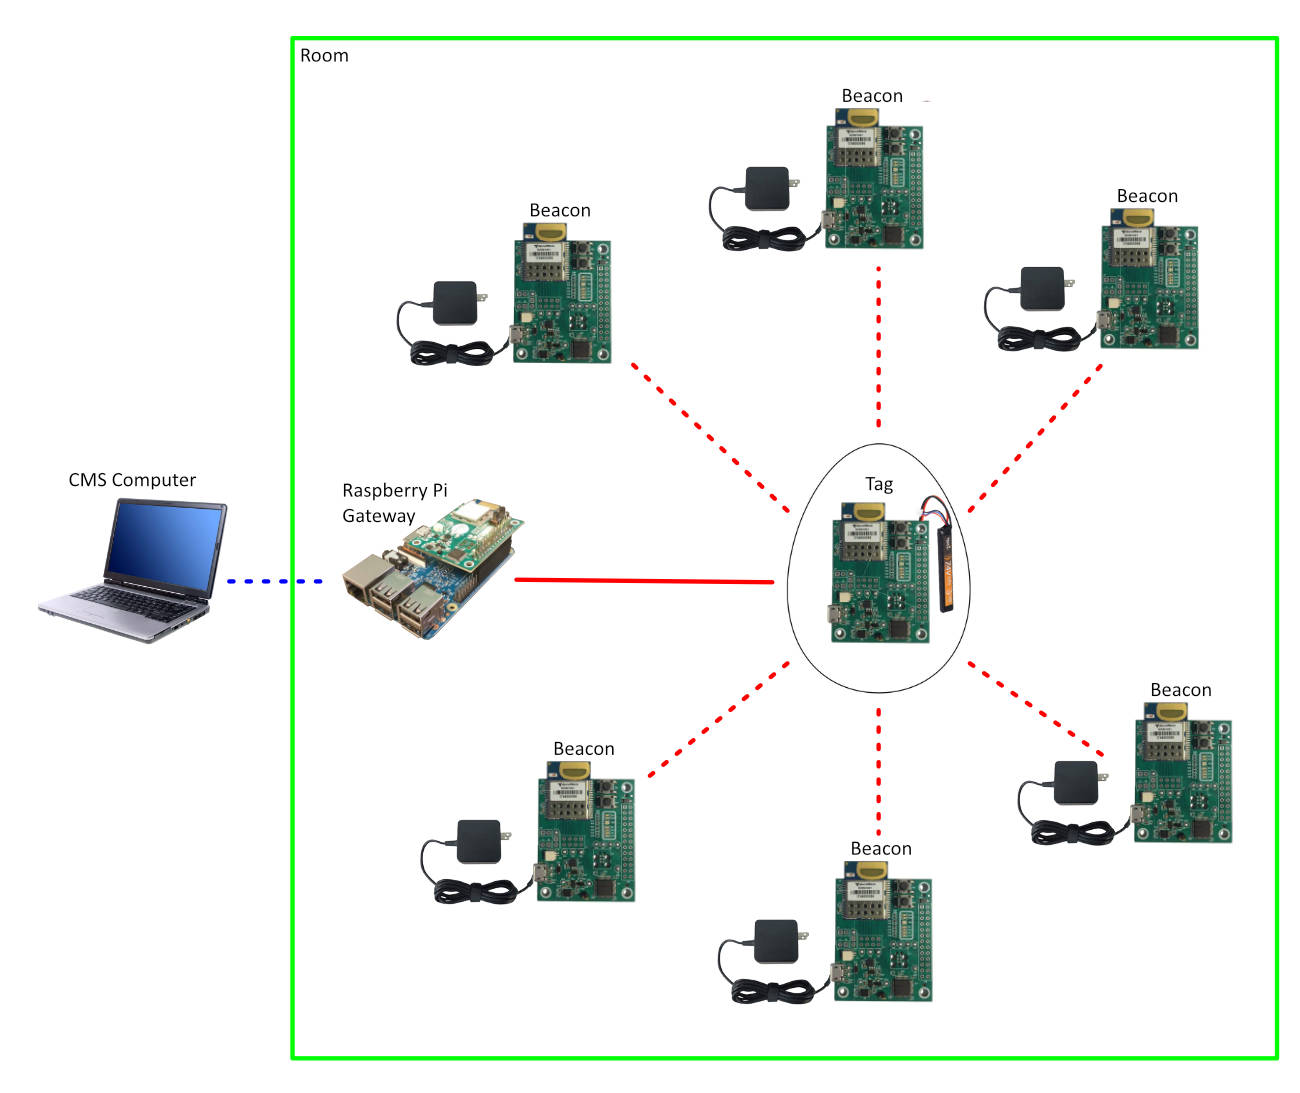 a technical schematic of a minimum size network of DWM-1001 boards for indoor positioning 